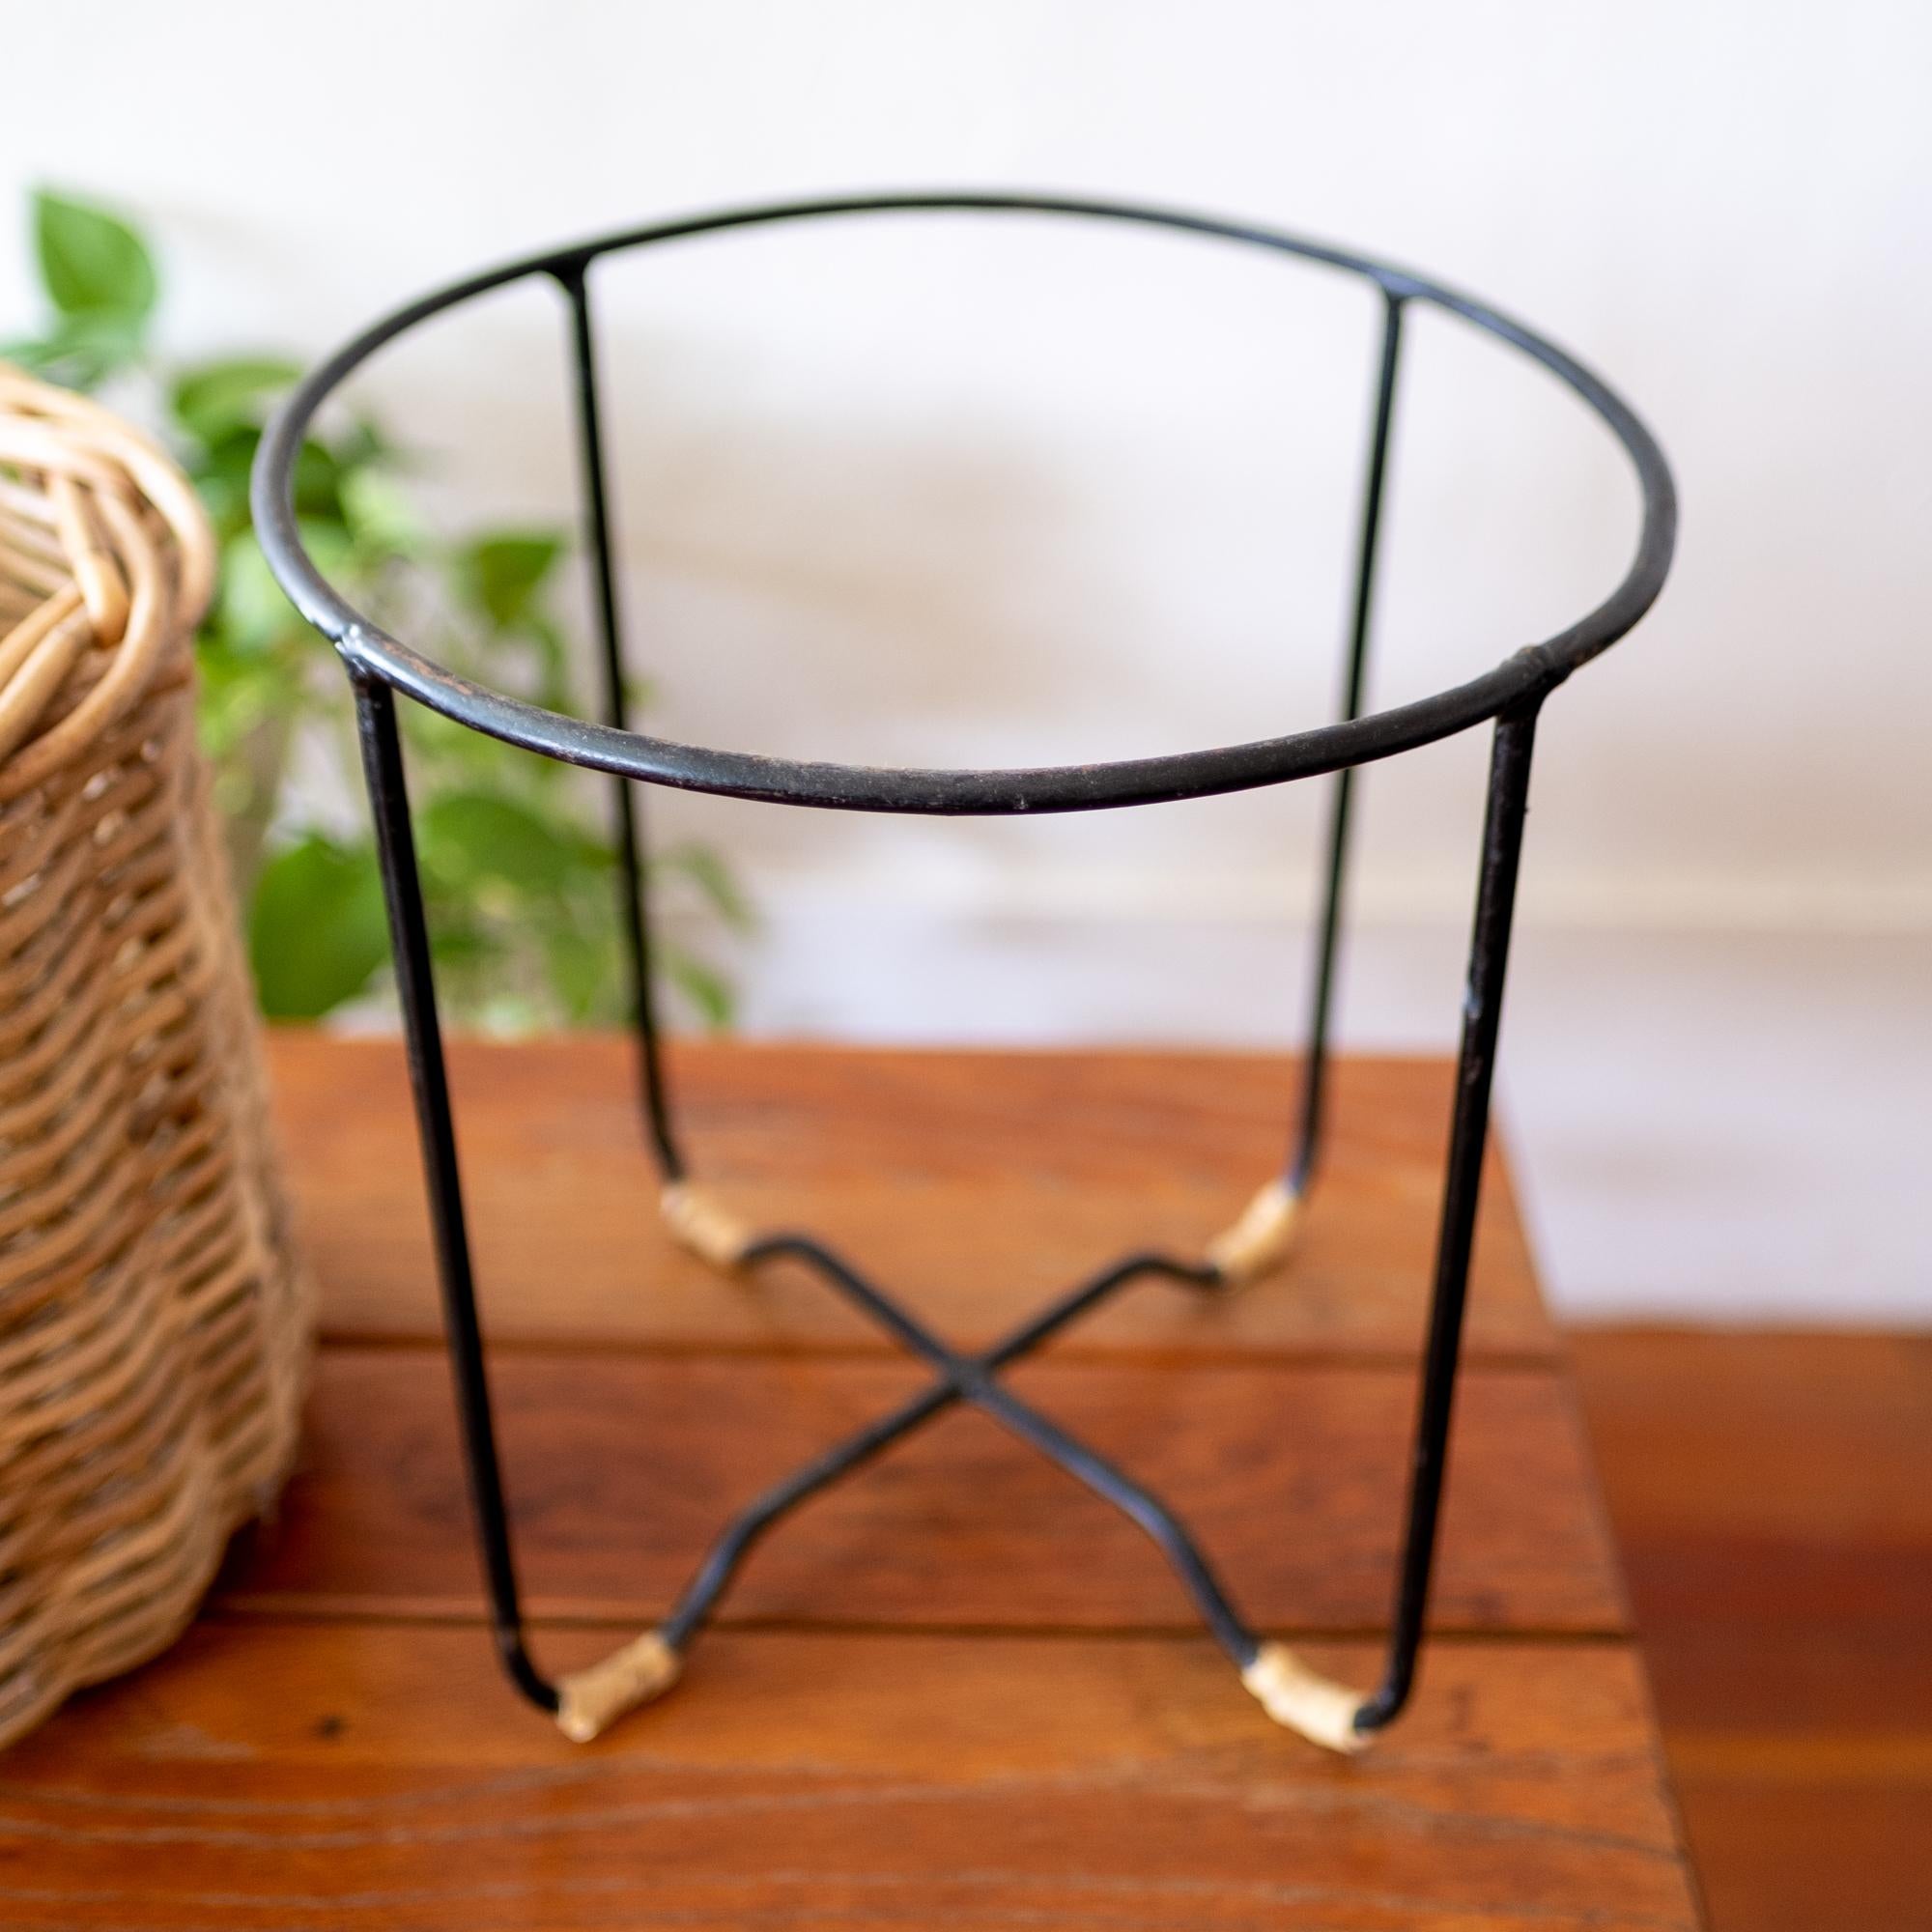 Mid-20th Century Iron Reed and Cane Waste Paper Basket